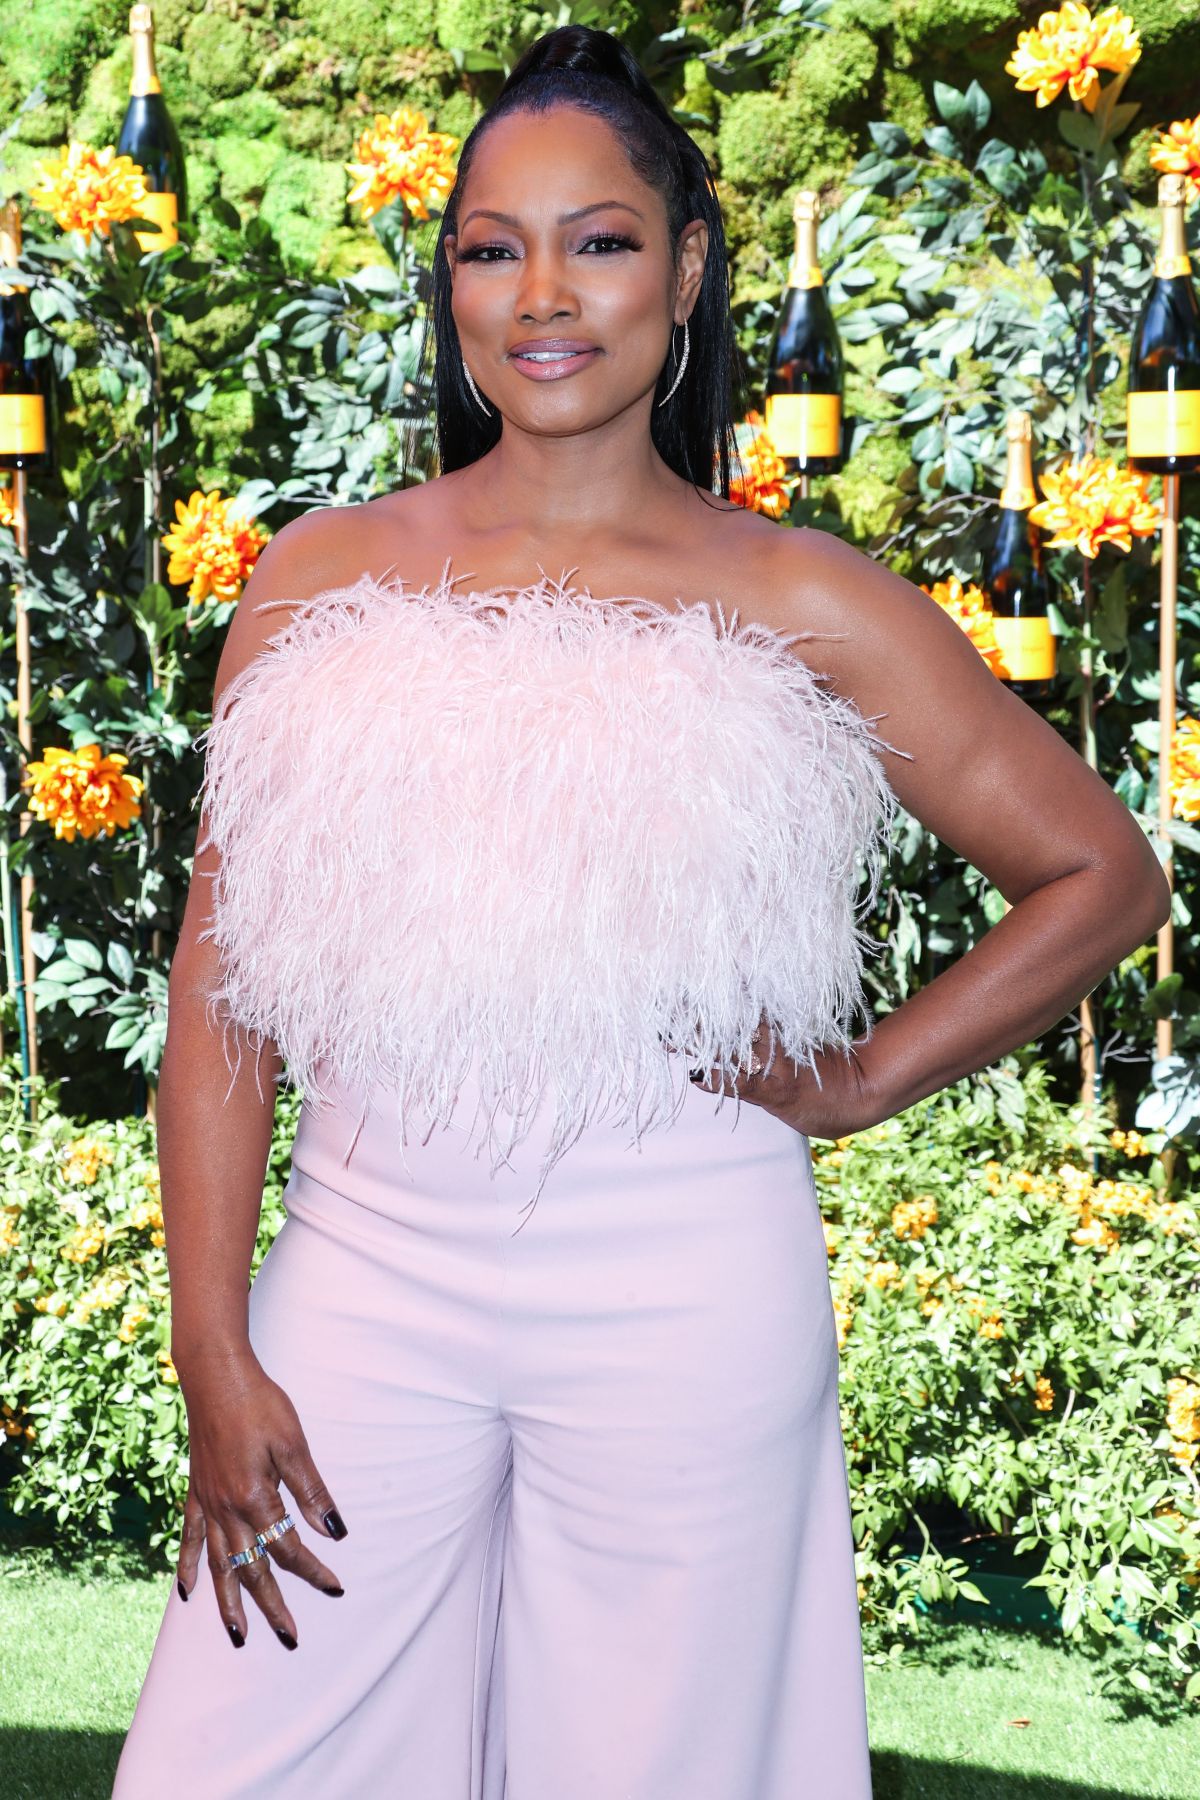 garcelle-beauvais-at-veuve-clicquot-polo-classic-at-will-rogers-state-park-in-los-angeles-10-05-2019-5.jpg